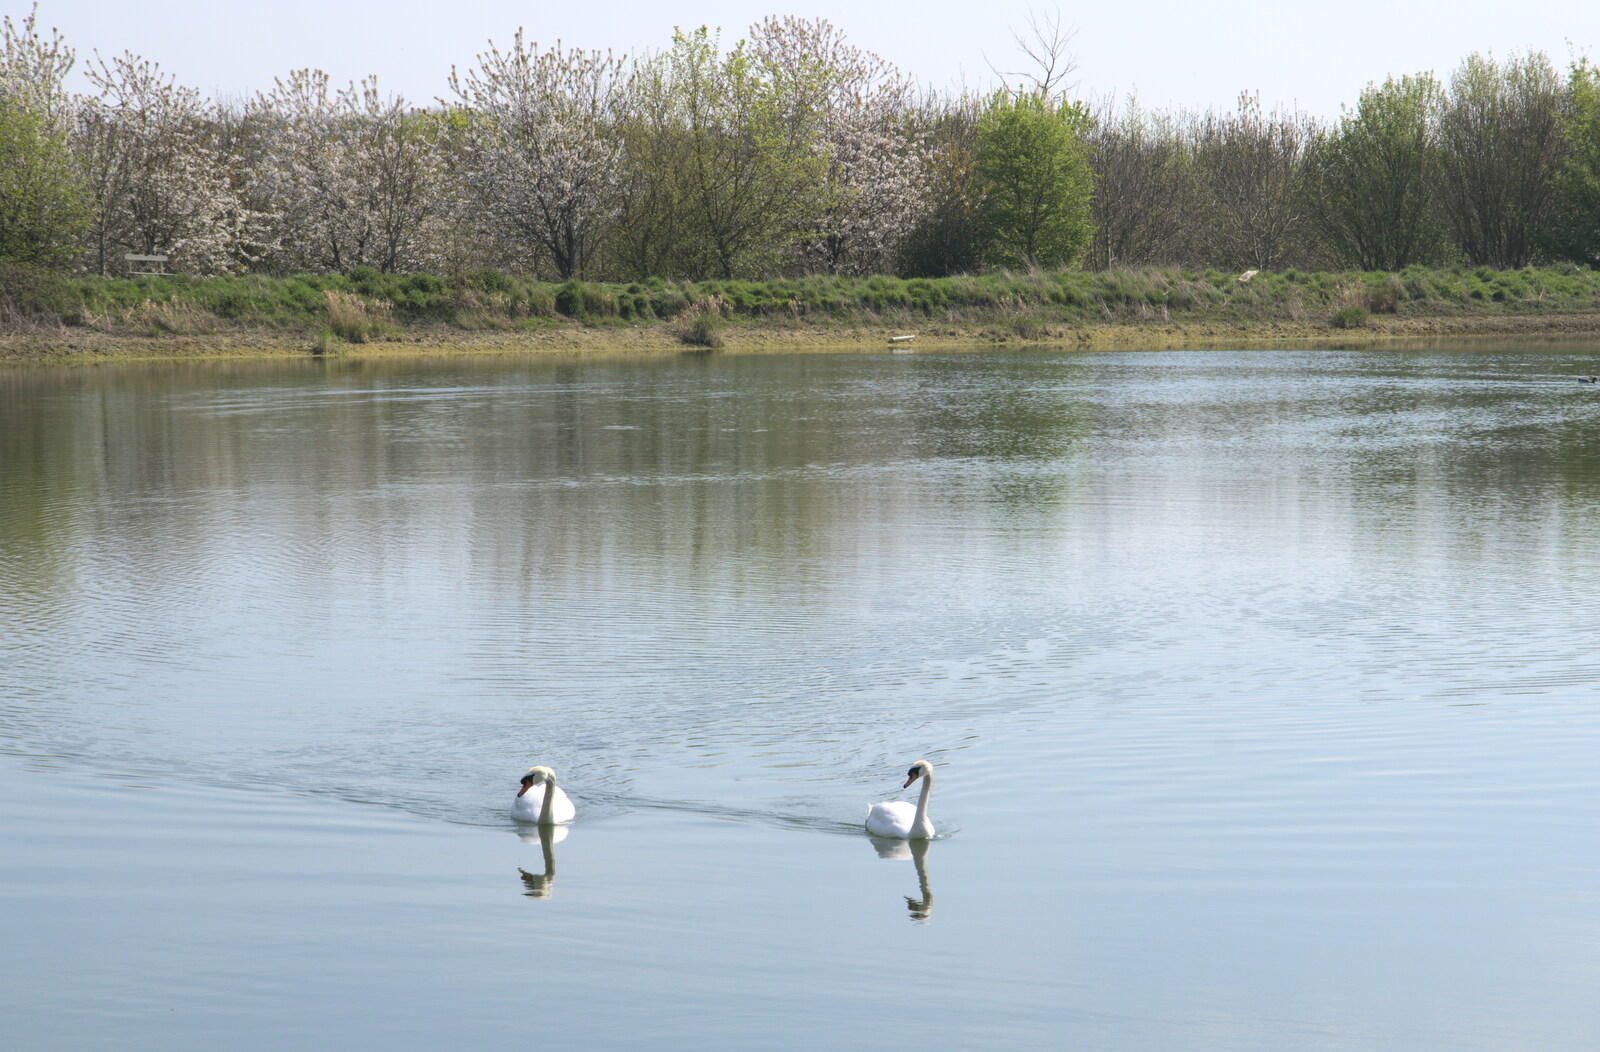 A couple of swans on the resevoir from A Weekend Camping Trip in the Garden, Brome, Suffolk - 11th April 2020